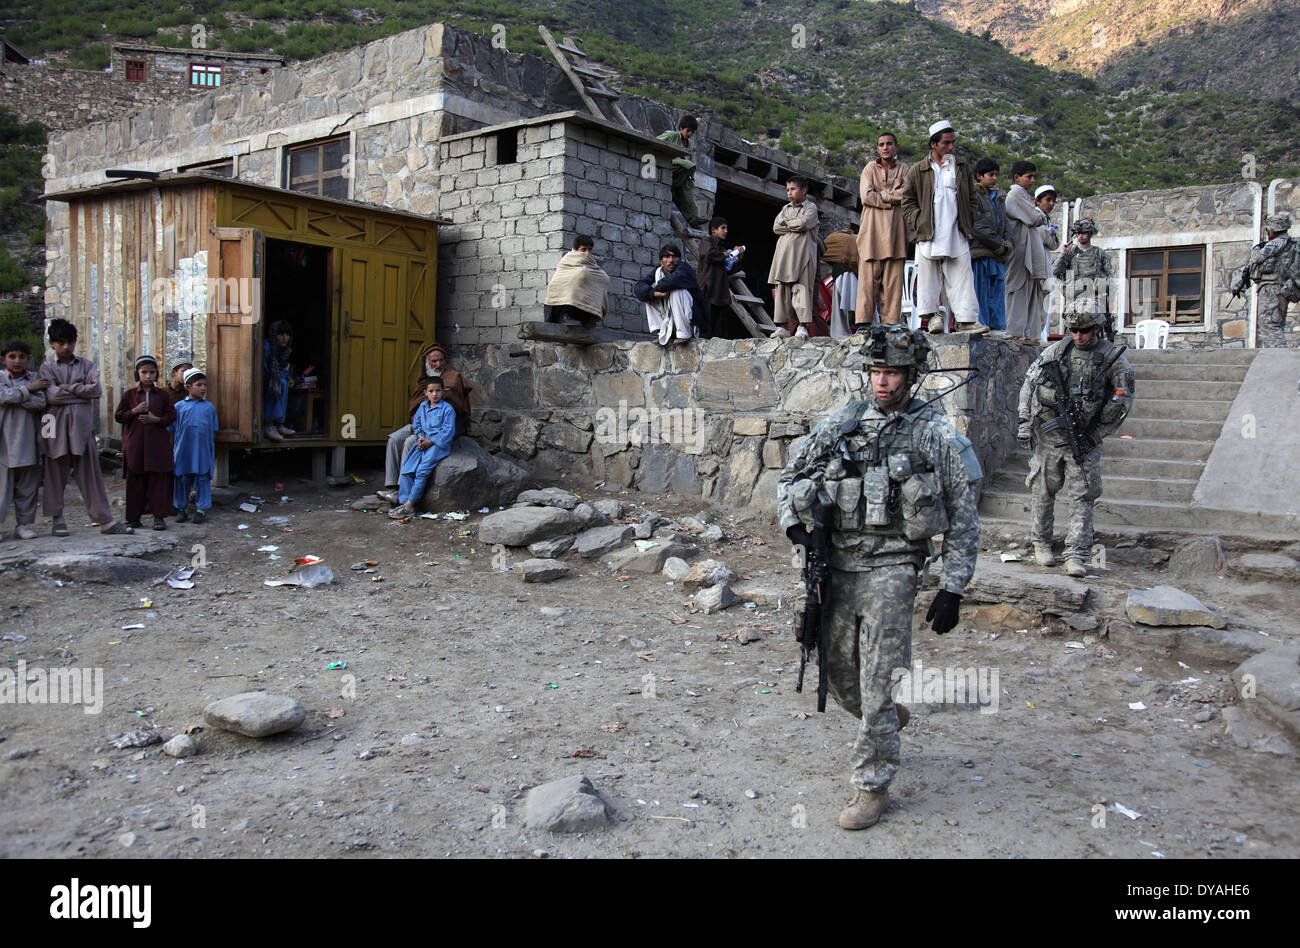 US Army soldiers with the Kunar Provincial Reconstruction Team, depart after holding a shura, or meeting December 7, 2009 in Lachey village, Shigal district, Kunar province, Afghanistan. Stock Photo